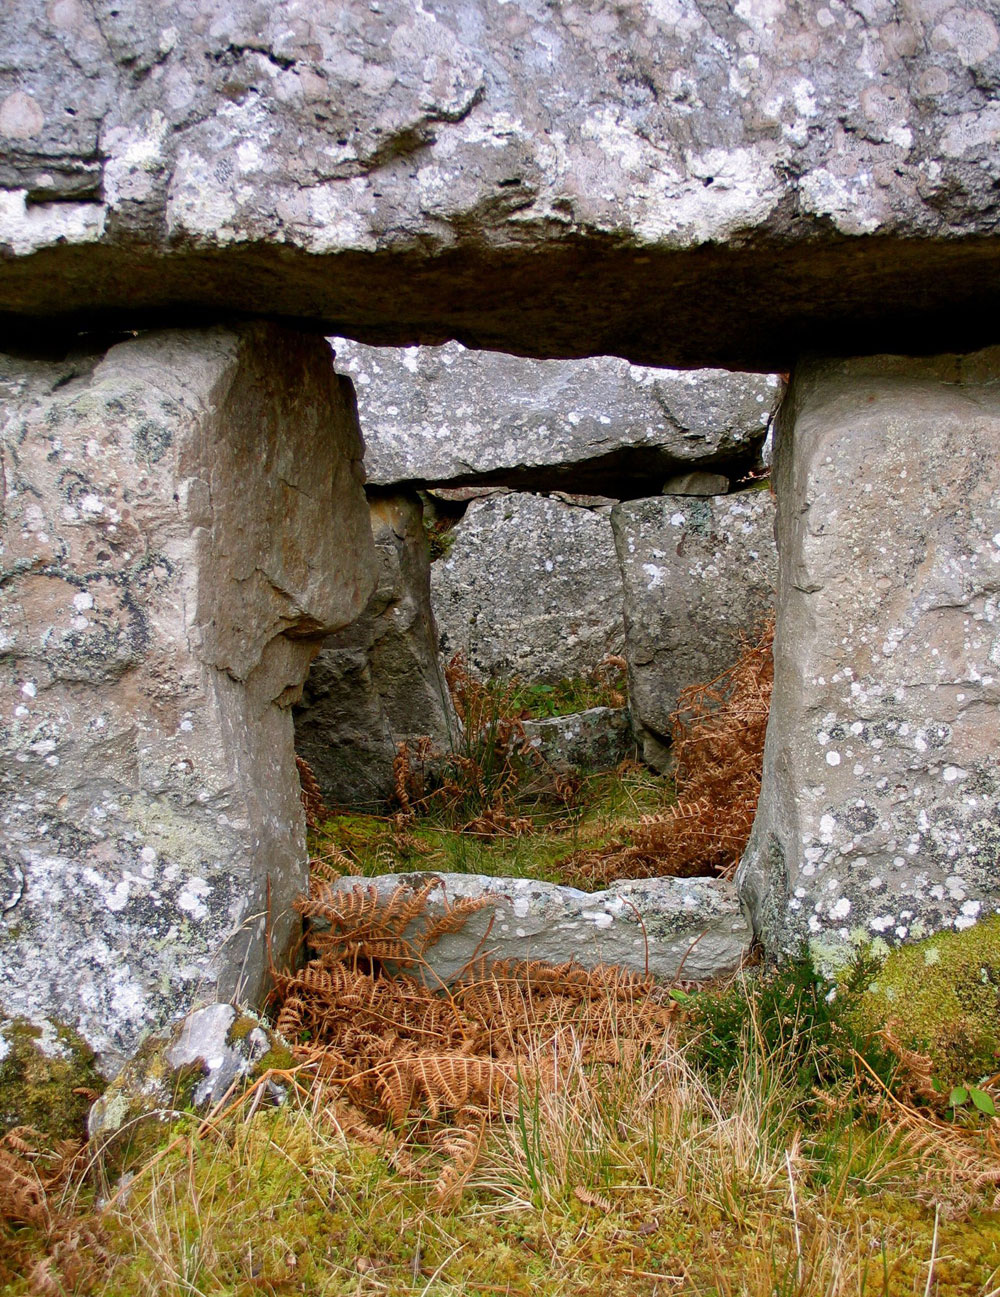 The view into the chamber of Croaghbeg through the entry jambs and portal.